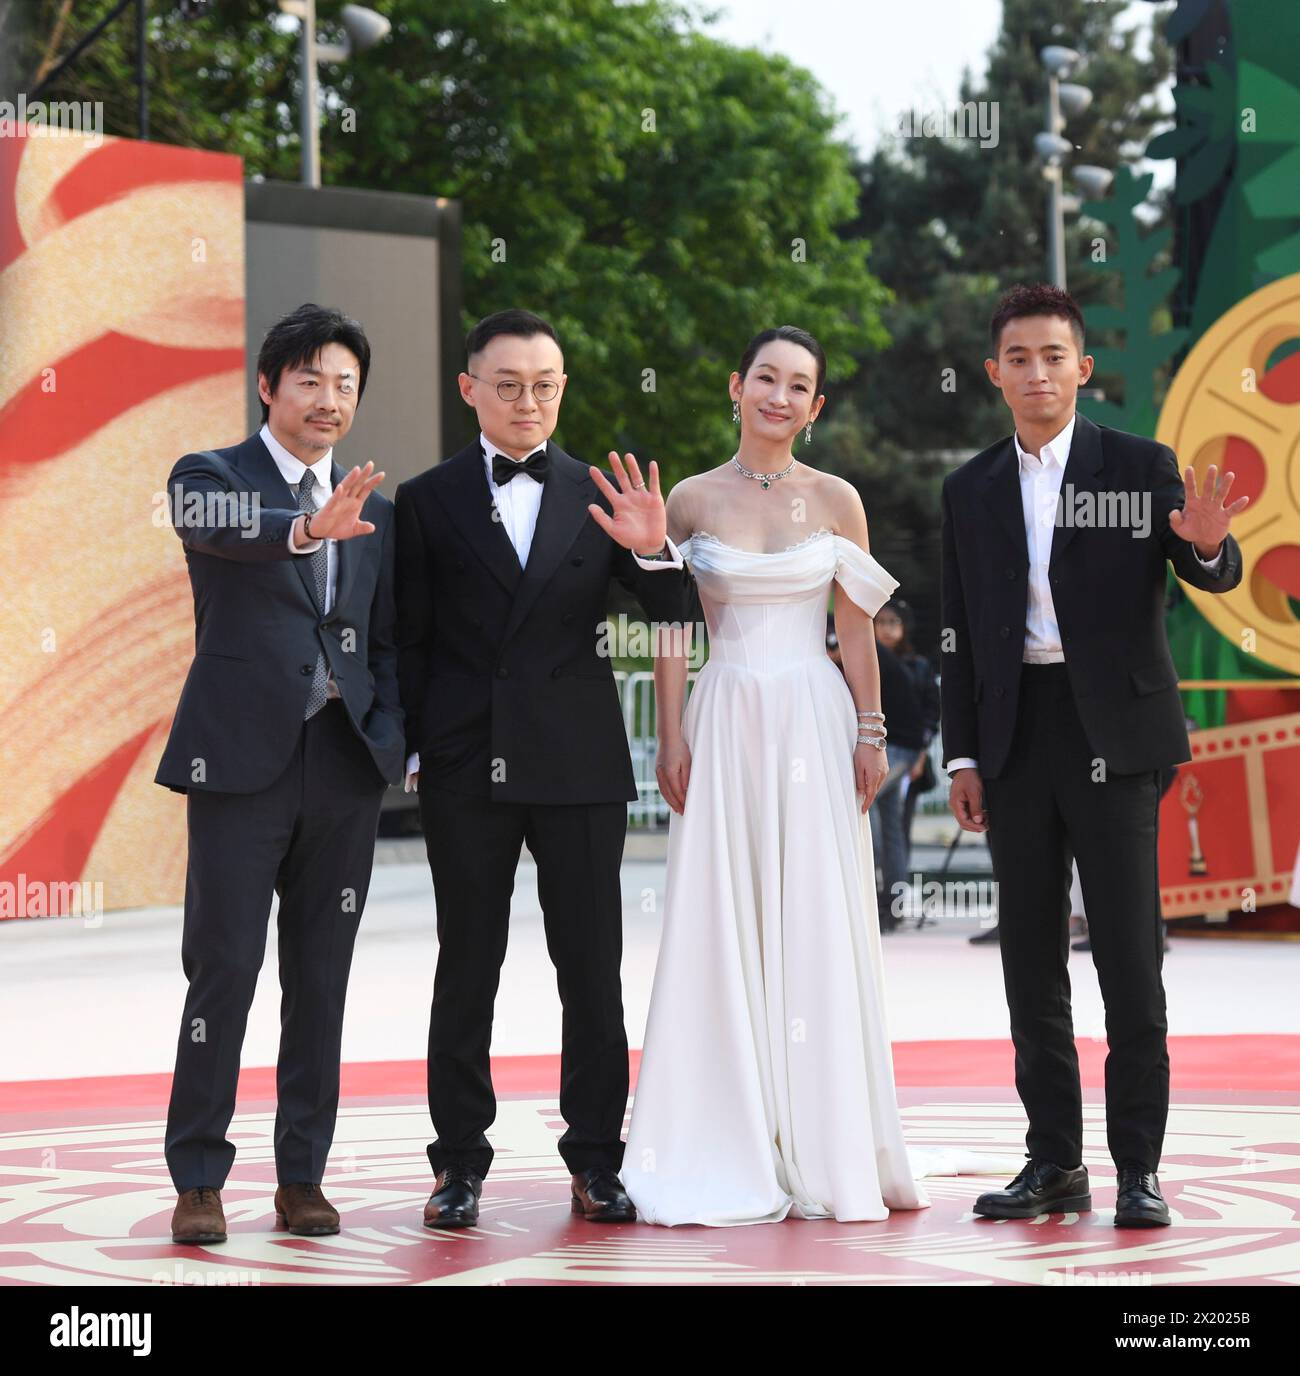 (240419) -- BEIJING, April 19, 2024 (Xinhua) -- Director Gao Peng (2nd L), actress Qin Hailu (2nd R), actor Zu Feng (1st L) and Zhou Zhengjie attend the opening of the 14th Beijing International Film Festival (BJIFF) in Beijing, capital of China, April 18, 2024. The 14th BJIFF kicked off on Thursday in the Chinese capital, welcoming filmmakers from home and abroad to discuss movie development and promote cultural exchanges in the industry.  Members of 14th Tiantan Award jury of this year's BJIFF, led by Serbian director Emir Kusturica as jury president, appeared at the opening ceremony.   A to Stock Photo